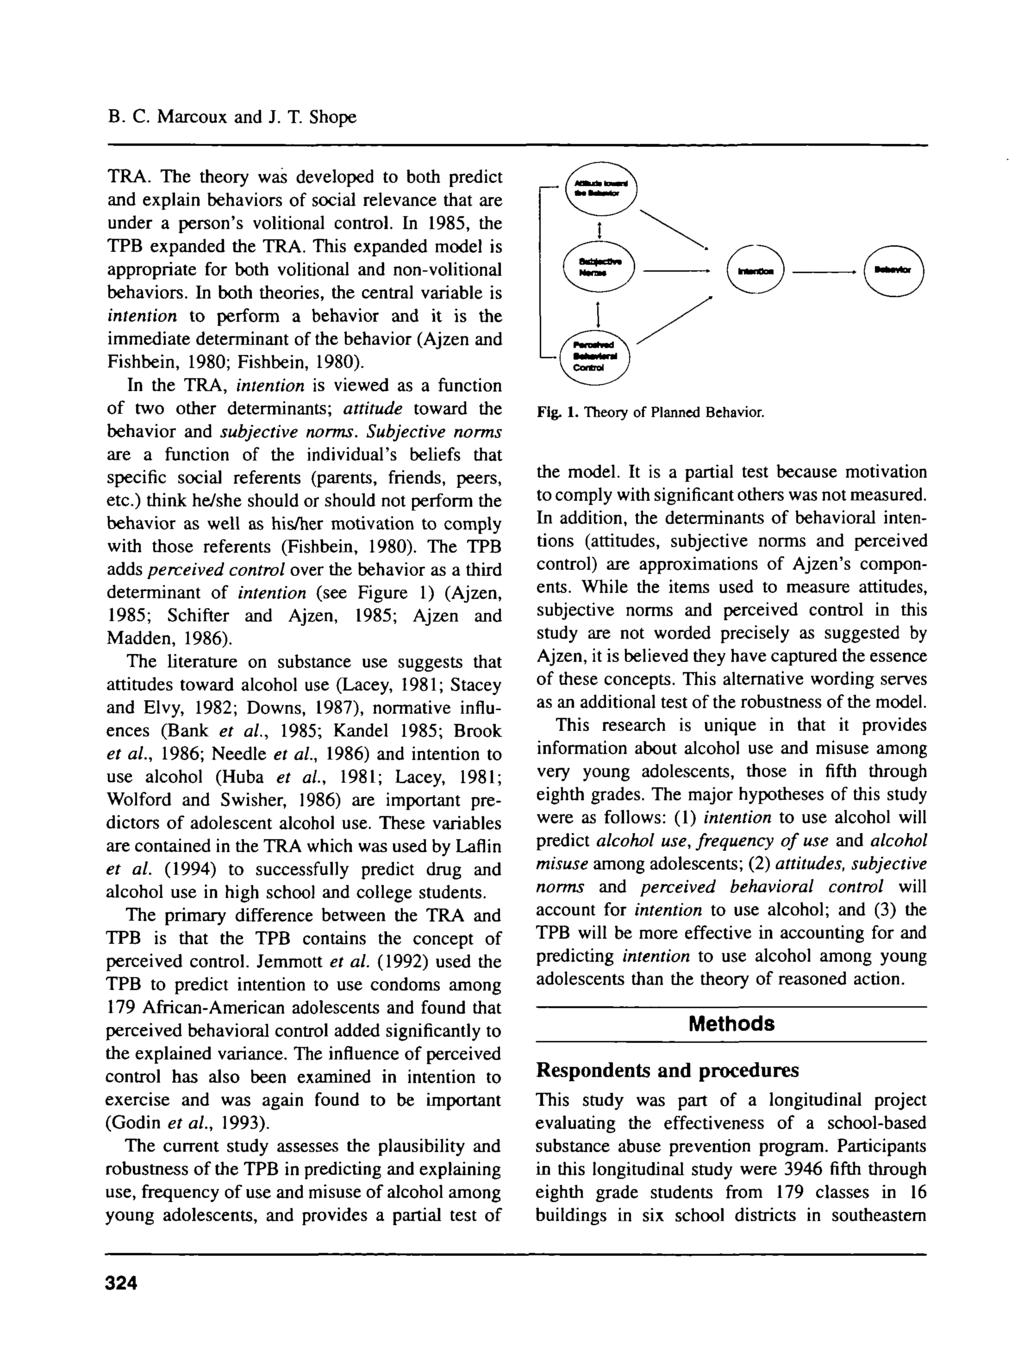 B. C. Marcoux and J. T. Shope TRA. The theory was developed to both predict and explain behaviors of social relevance that are under a person's volitional control. In 1985, the TPB expanded the TRA.